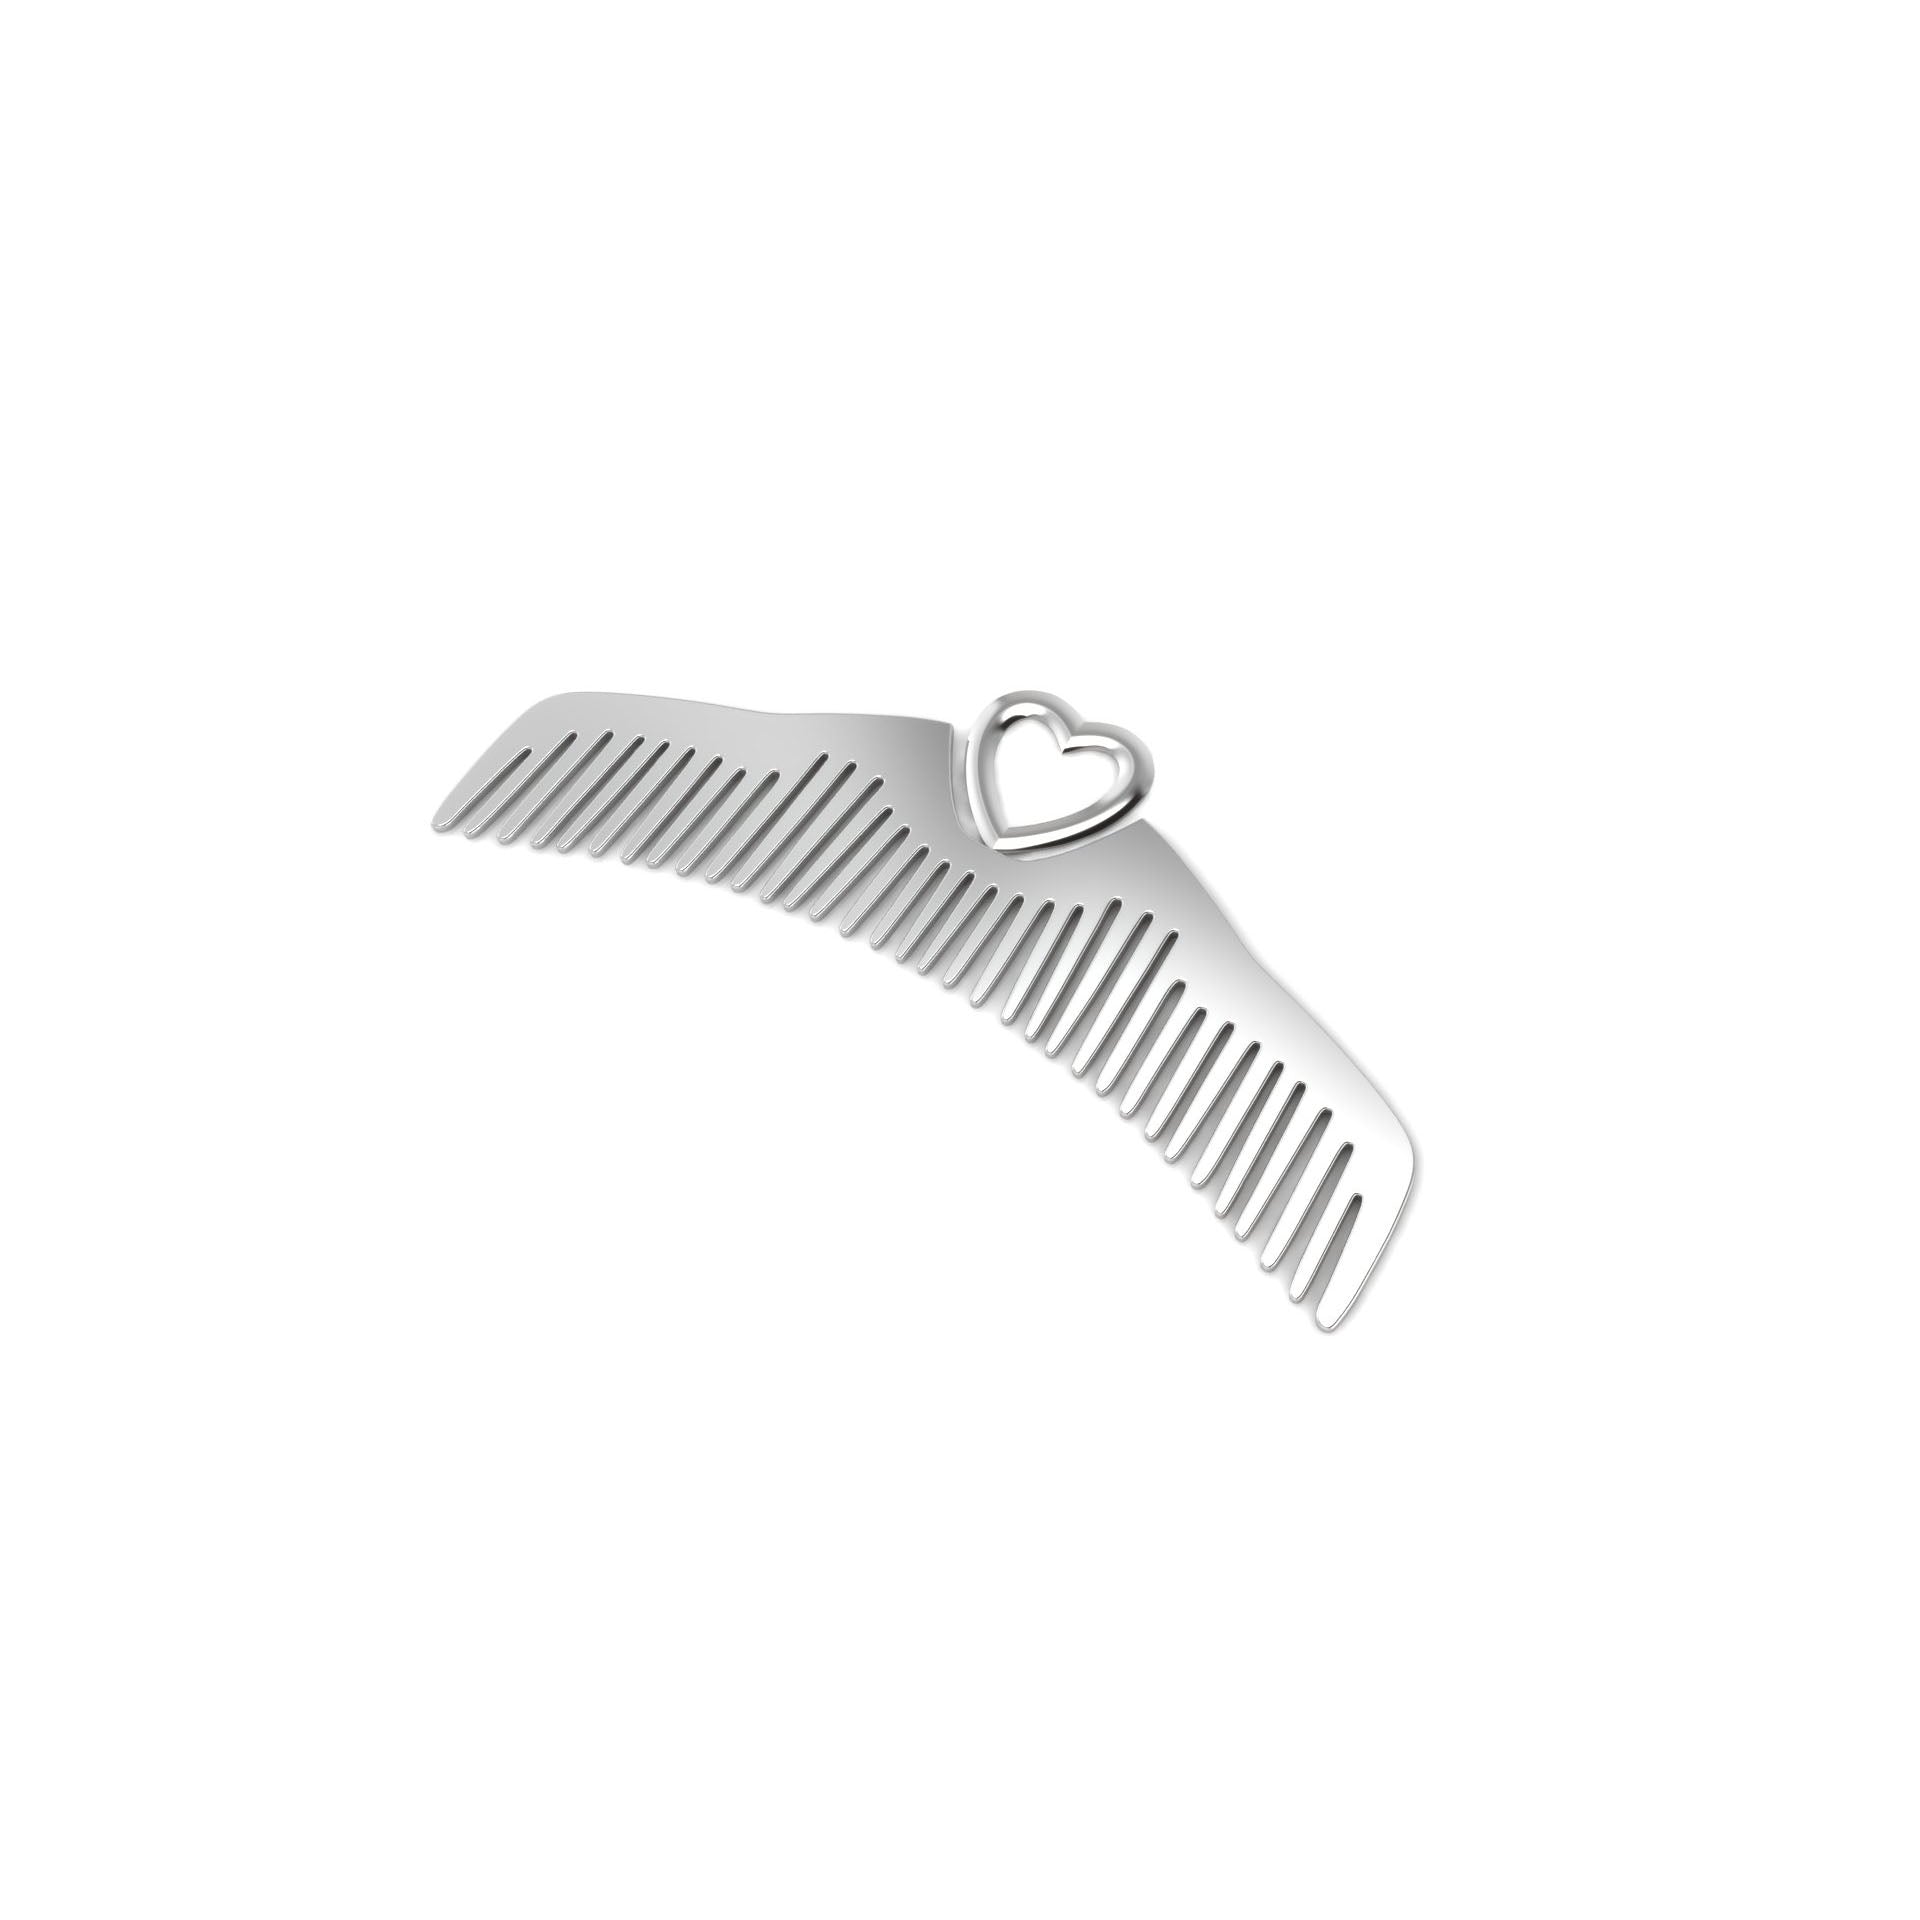 Sterling Silver Comb - Heart